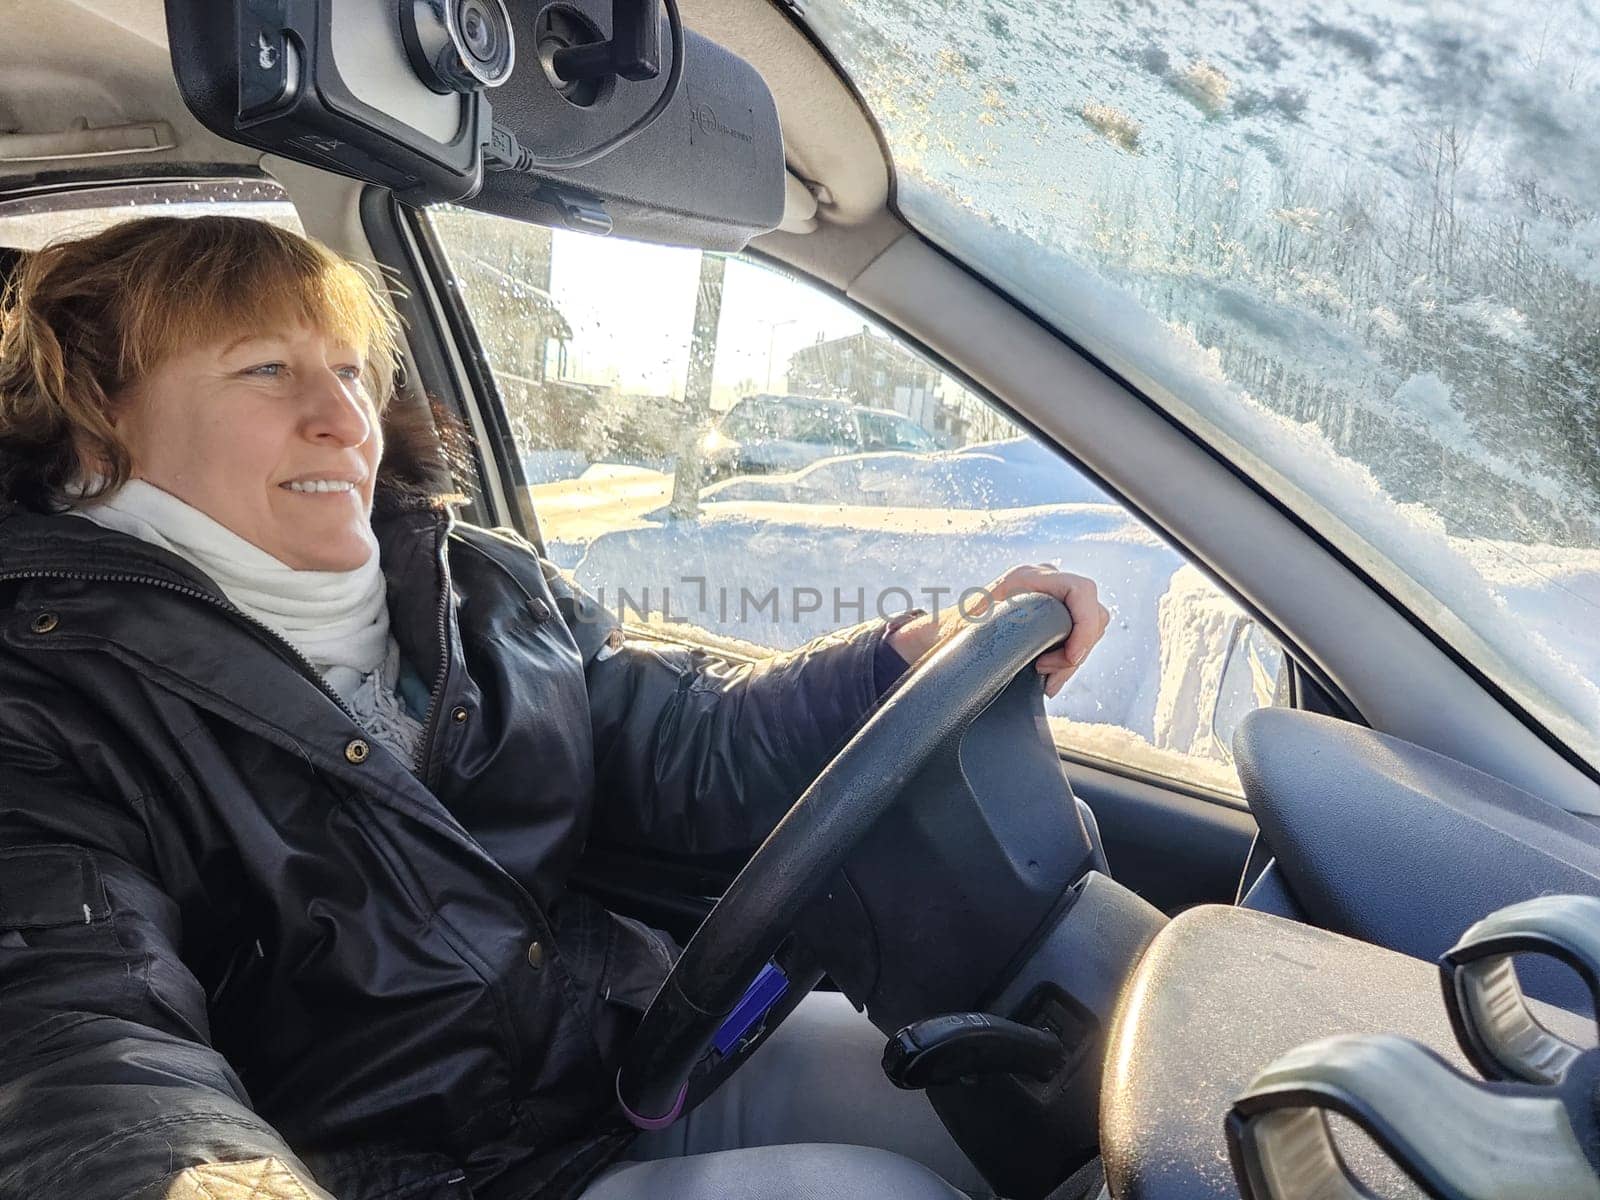 A woman in a car taking a selfie while enjoying a drive. Female driver in warm jacket posing inside car in warm jacket on cold day by keleny